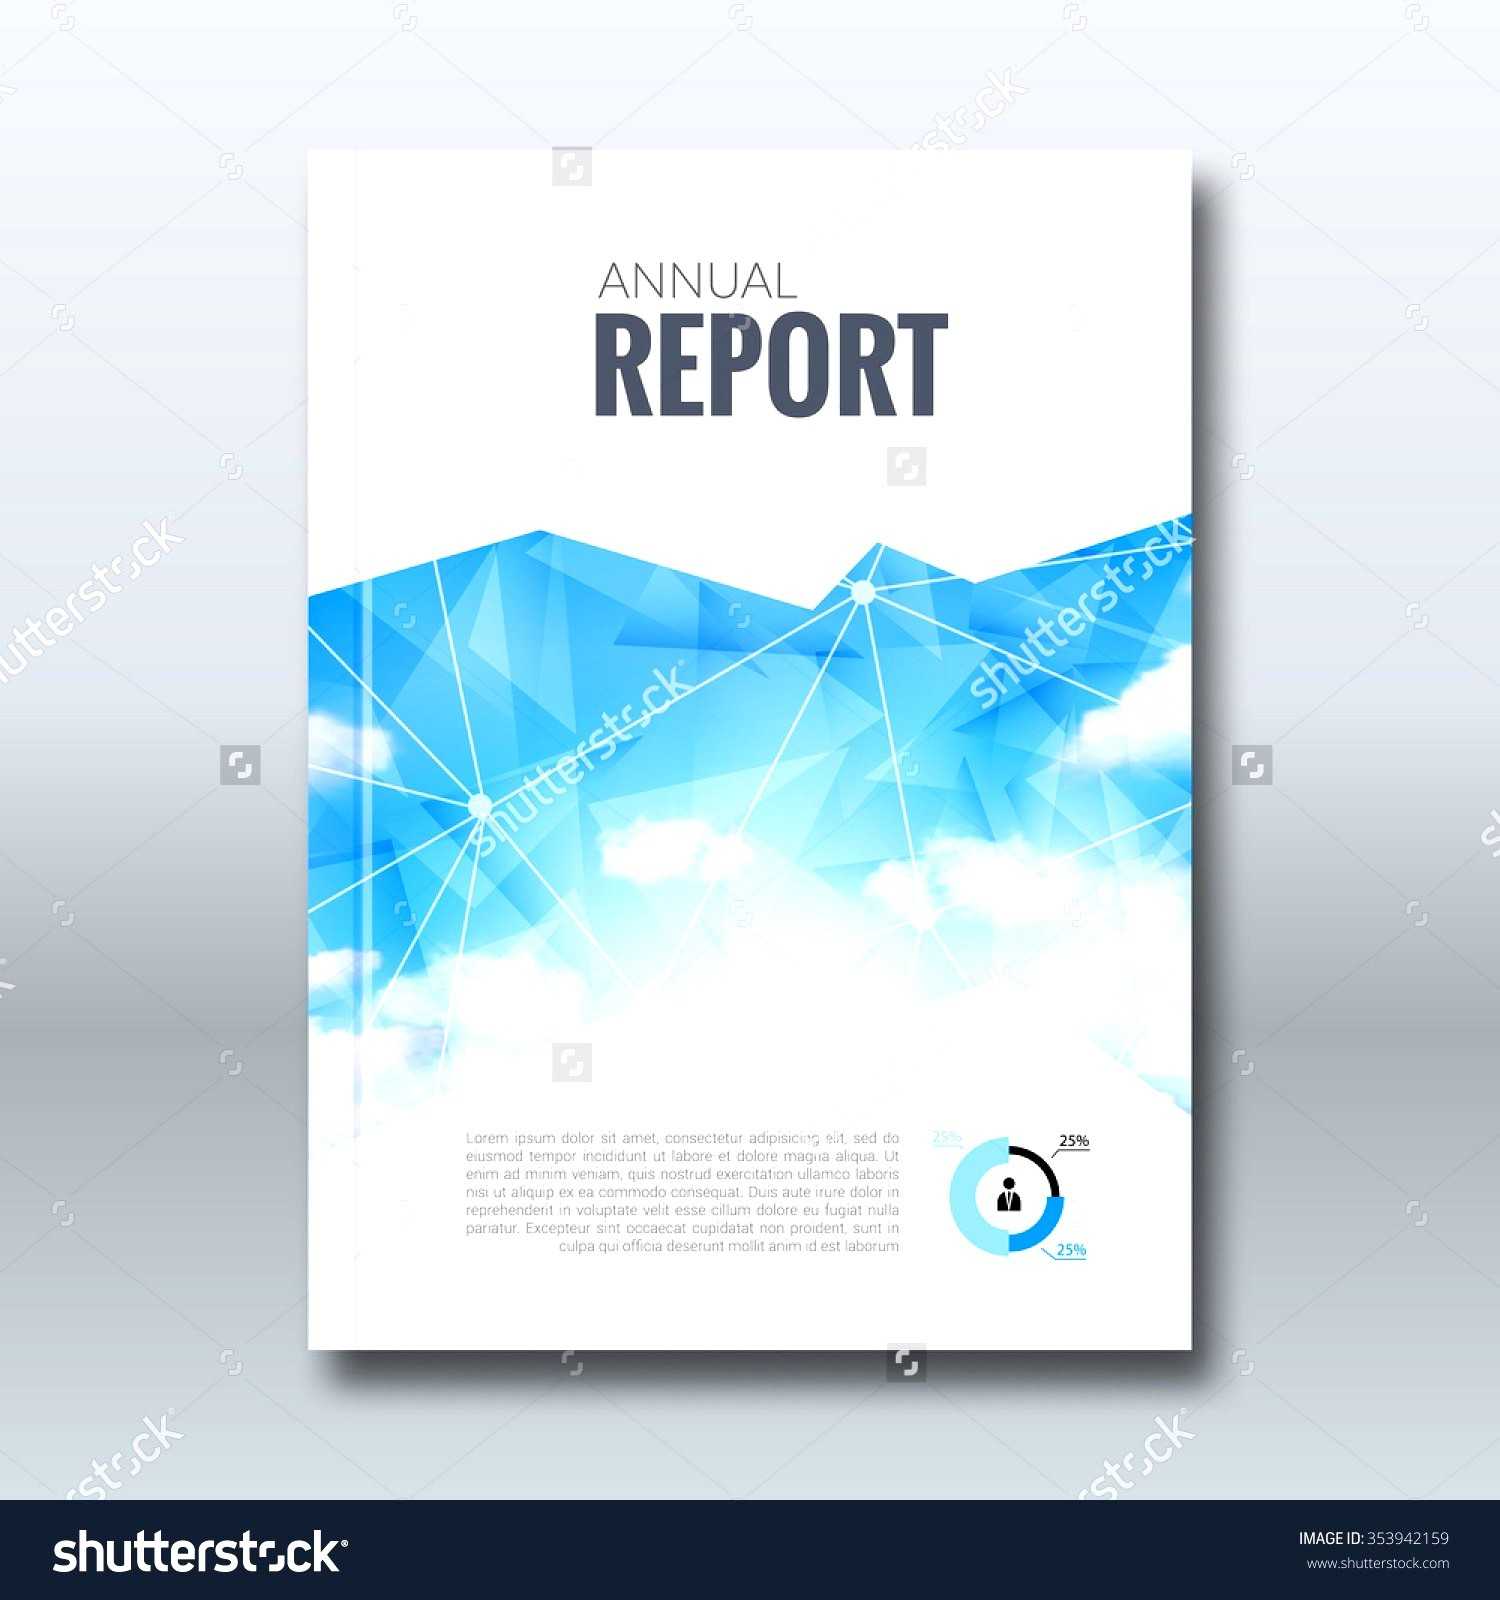 033 Template Ideas Ms Word Design Freeload Cover Page With Regard To Microsoft Word Cover Page Templates Download